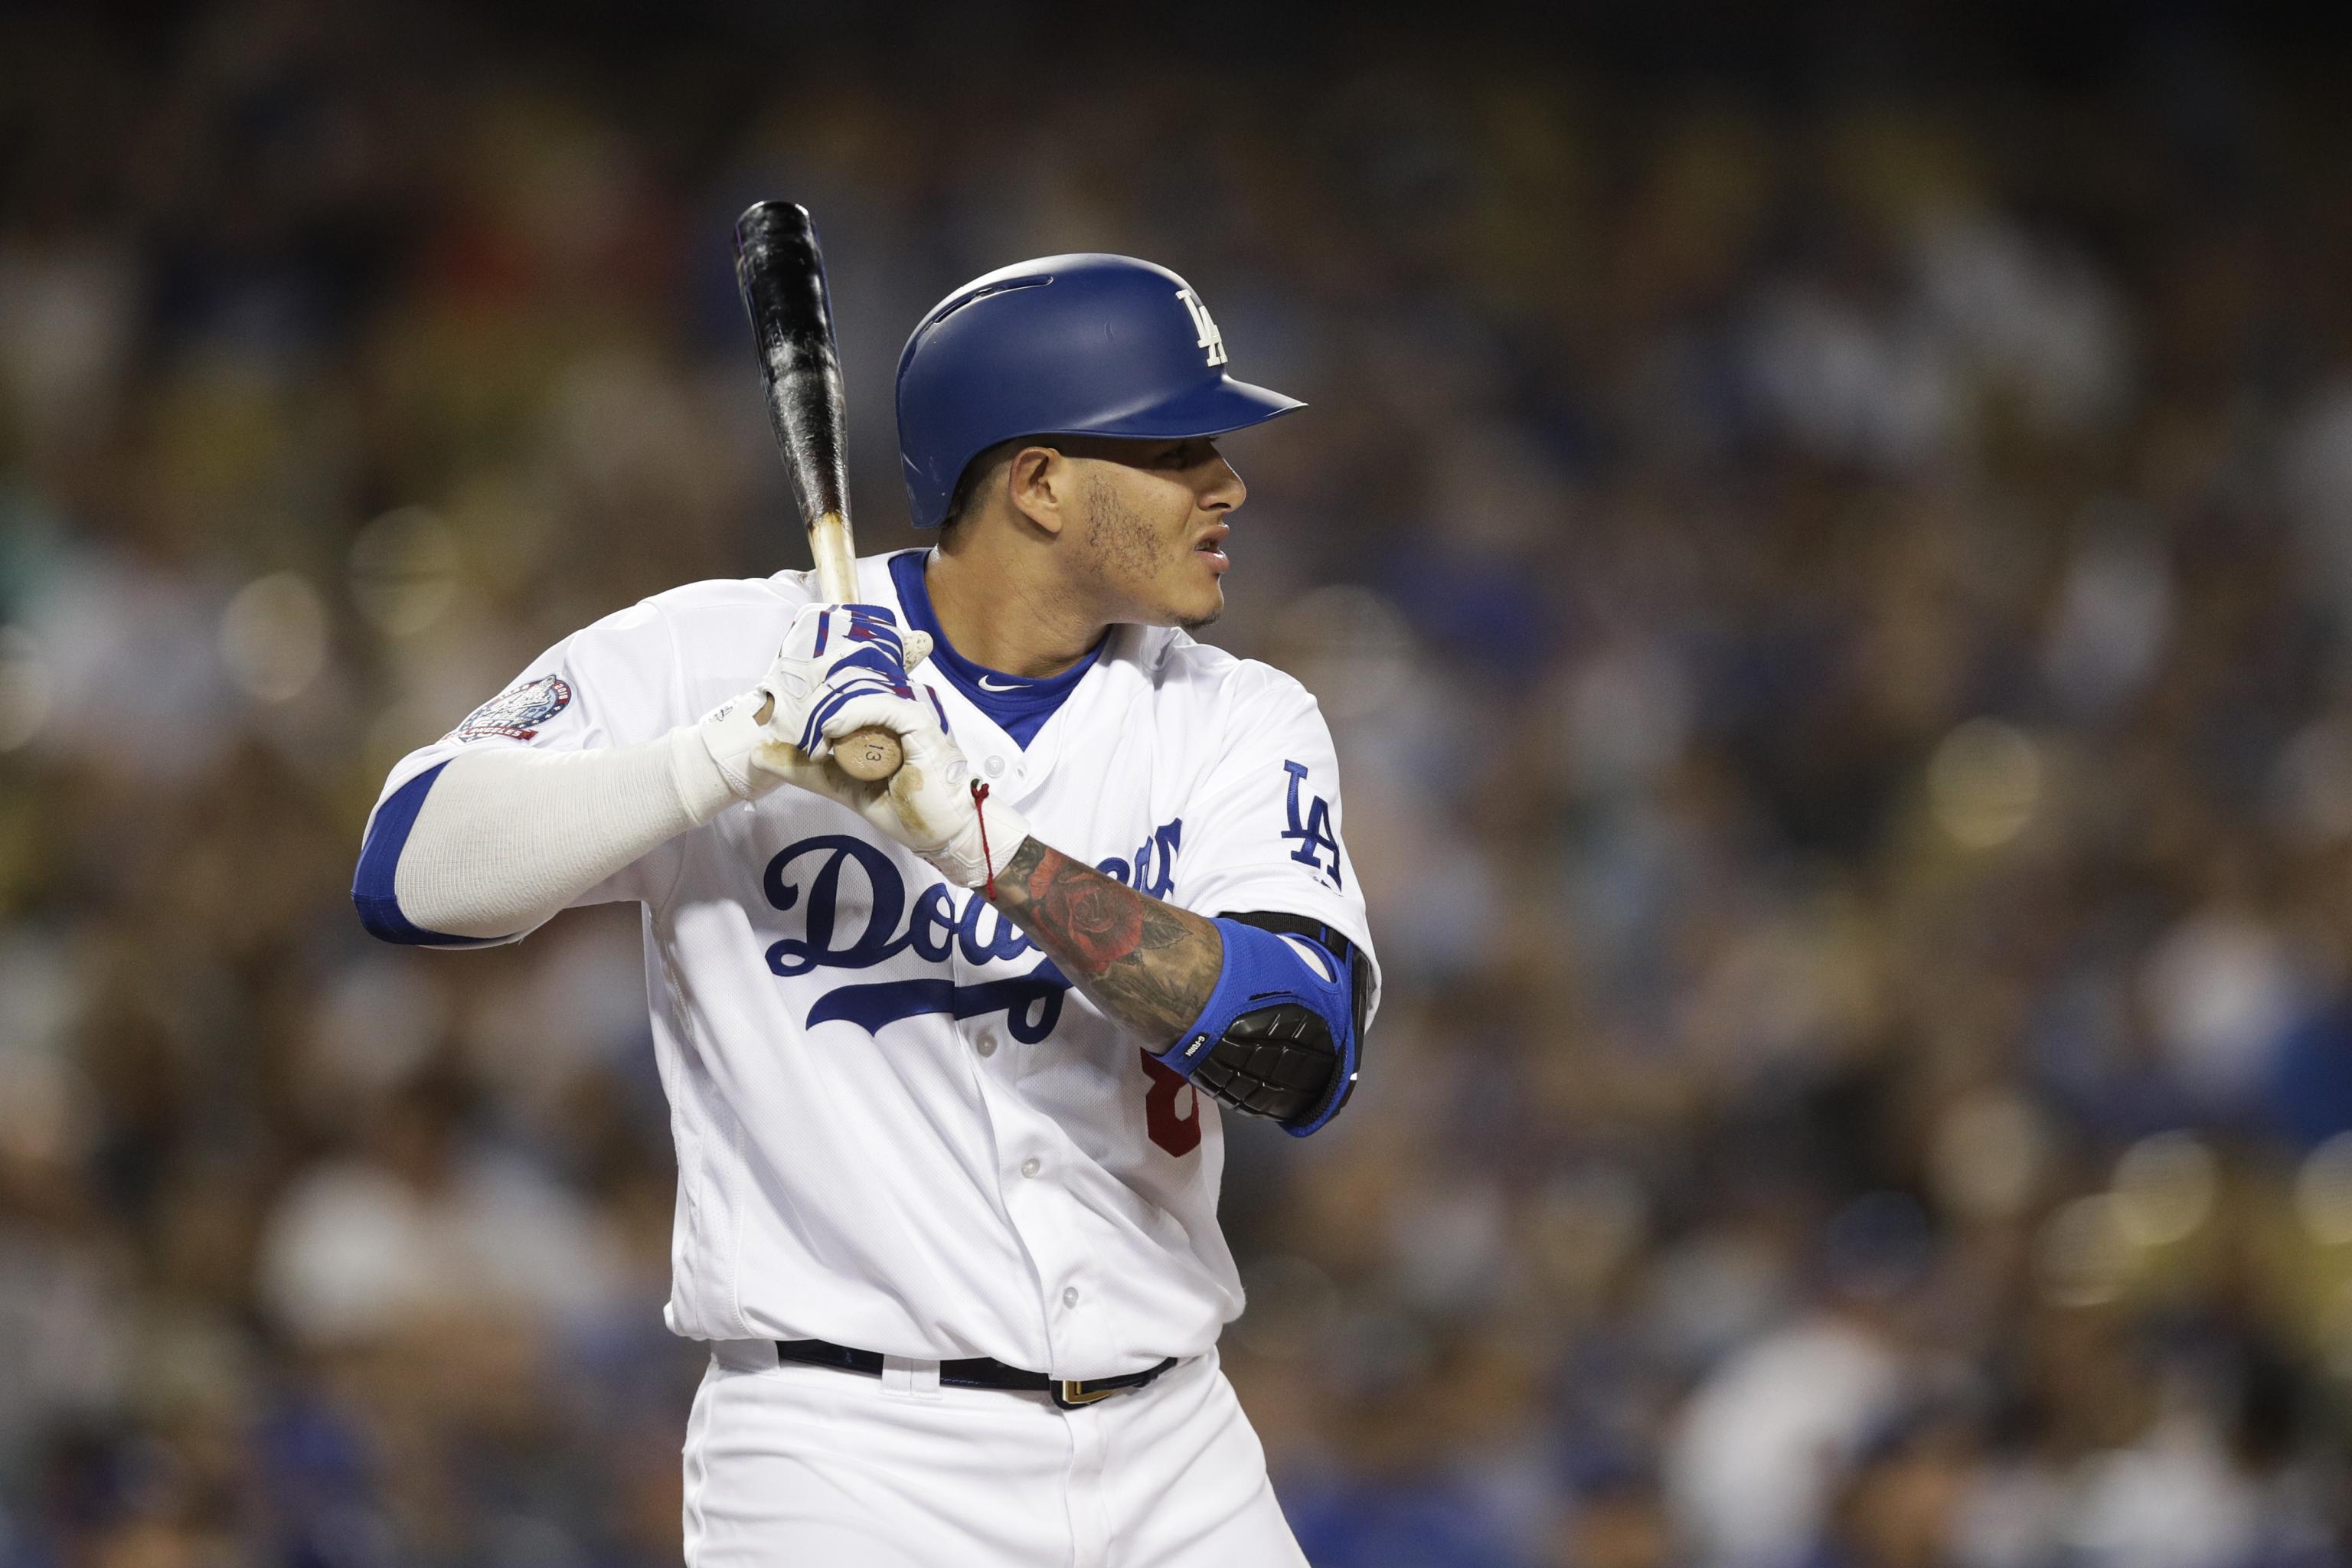 Padres' Manny Machado: Yankees didn't want me as free agent after 2018  trade 'didn't go through' 